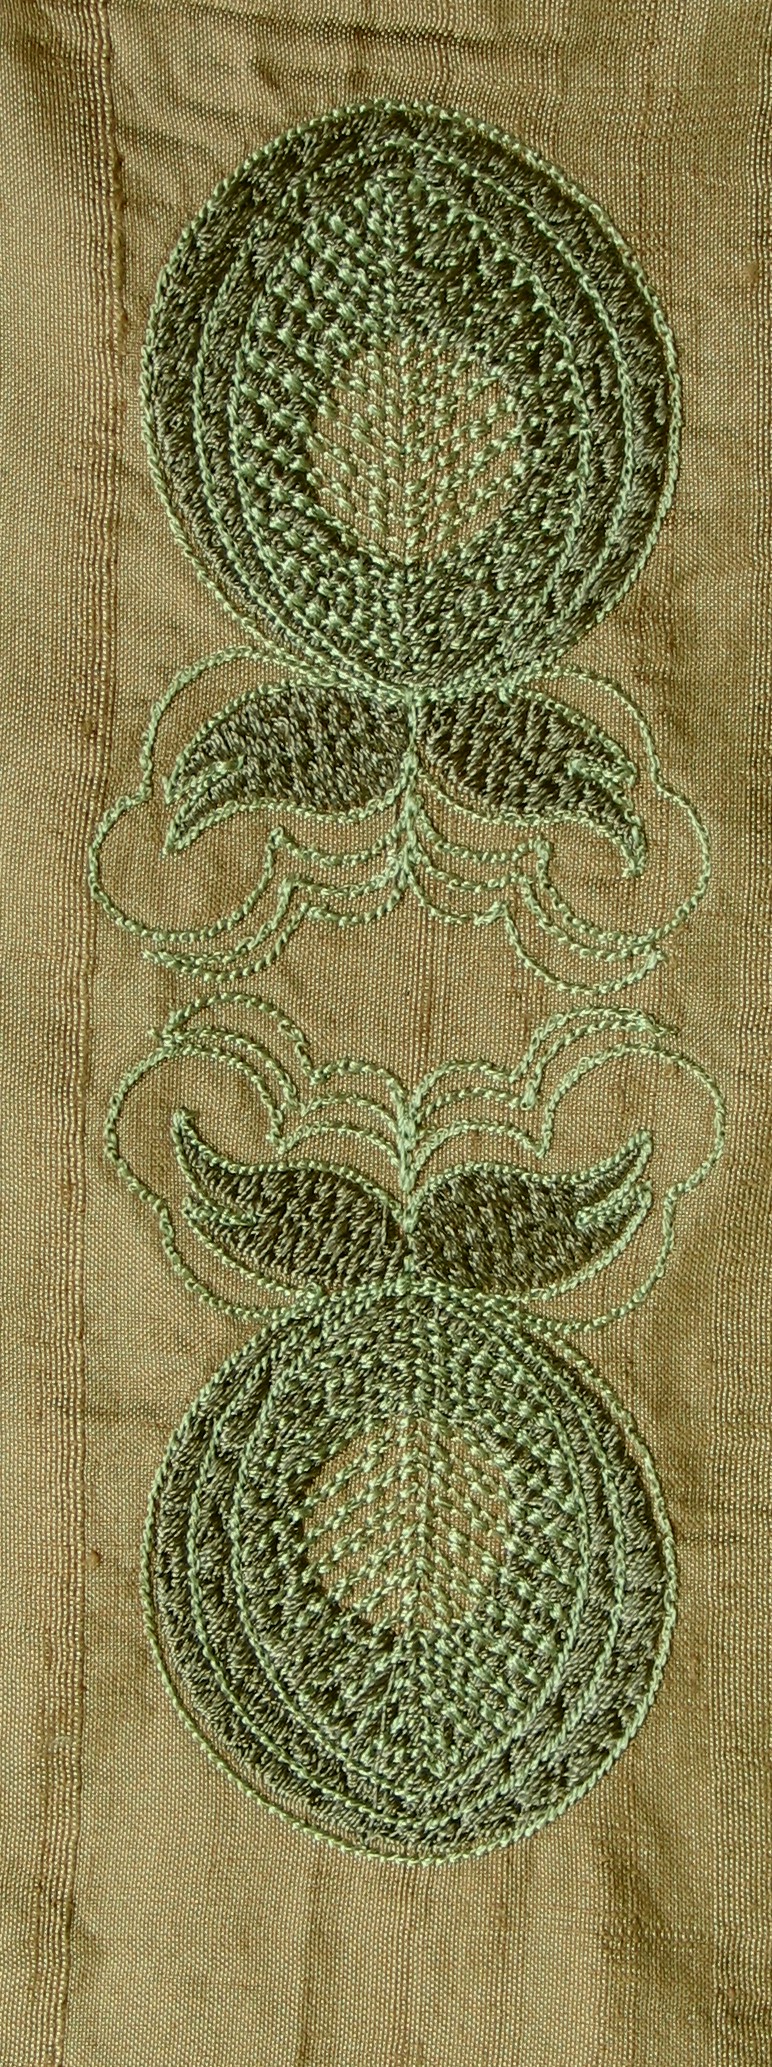 egyptian-fish-embroidery